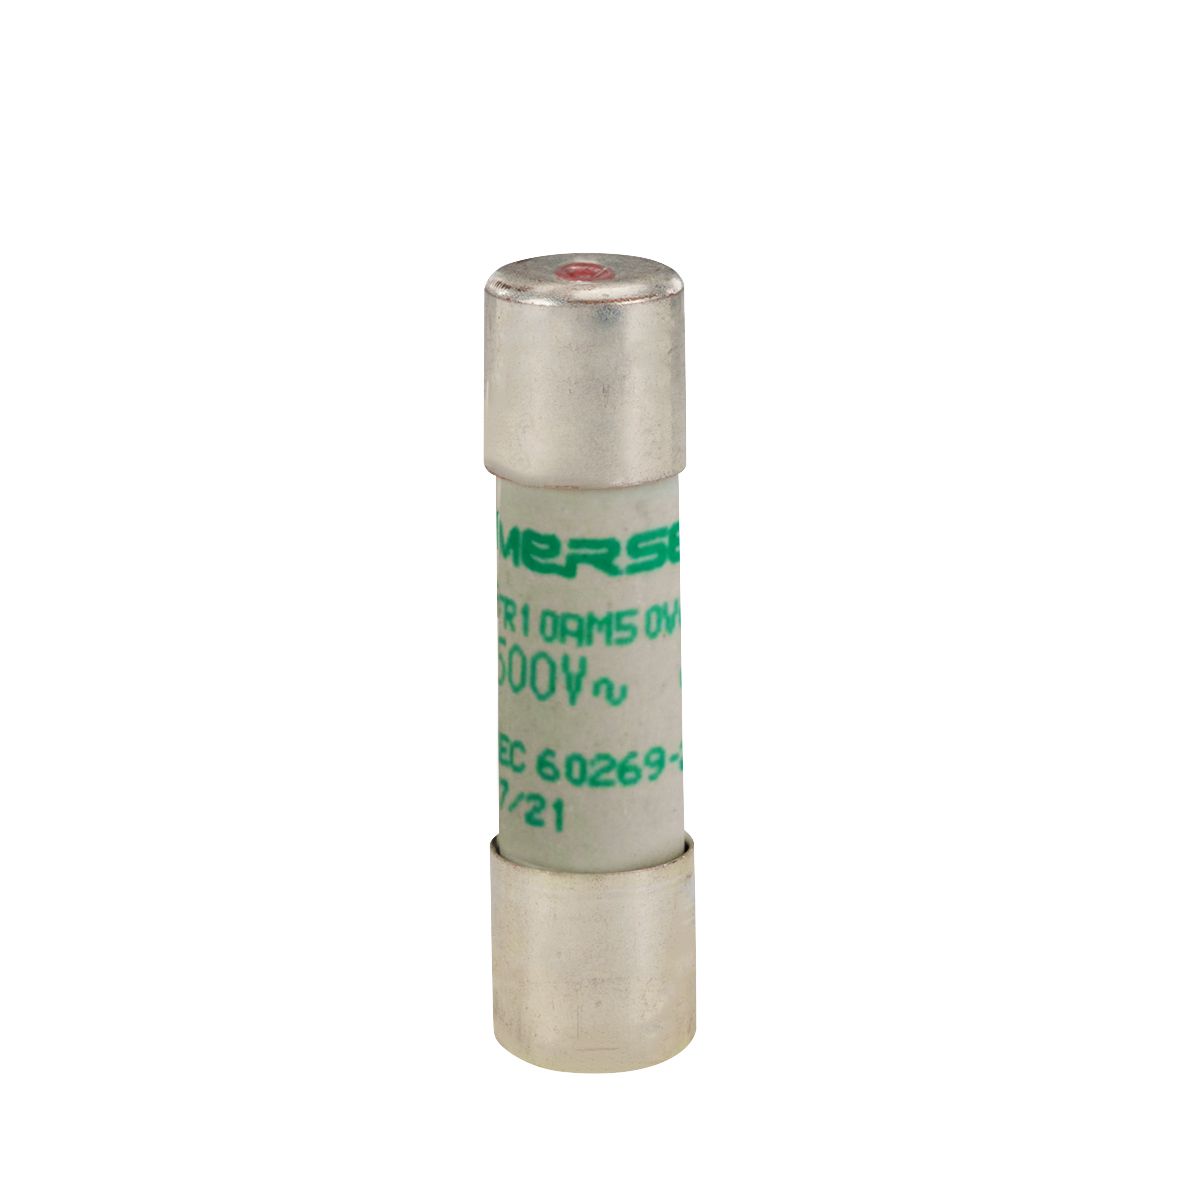 G222209 - Cylindrical fuse-link aM 500VAC 10.3x38, 2A with indicator